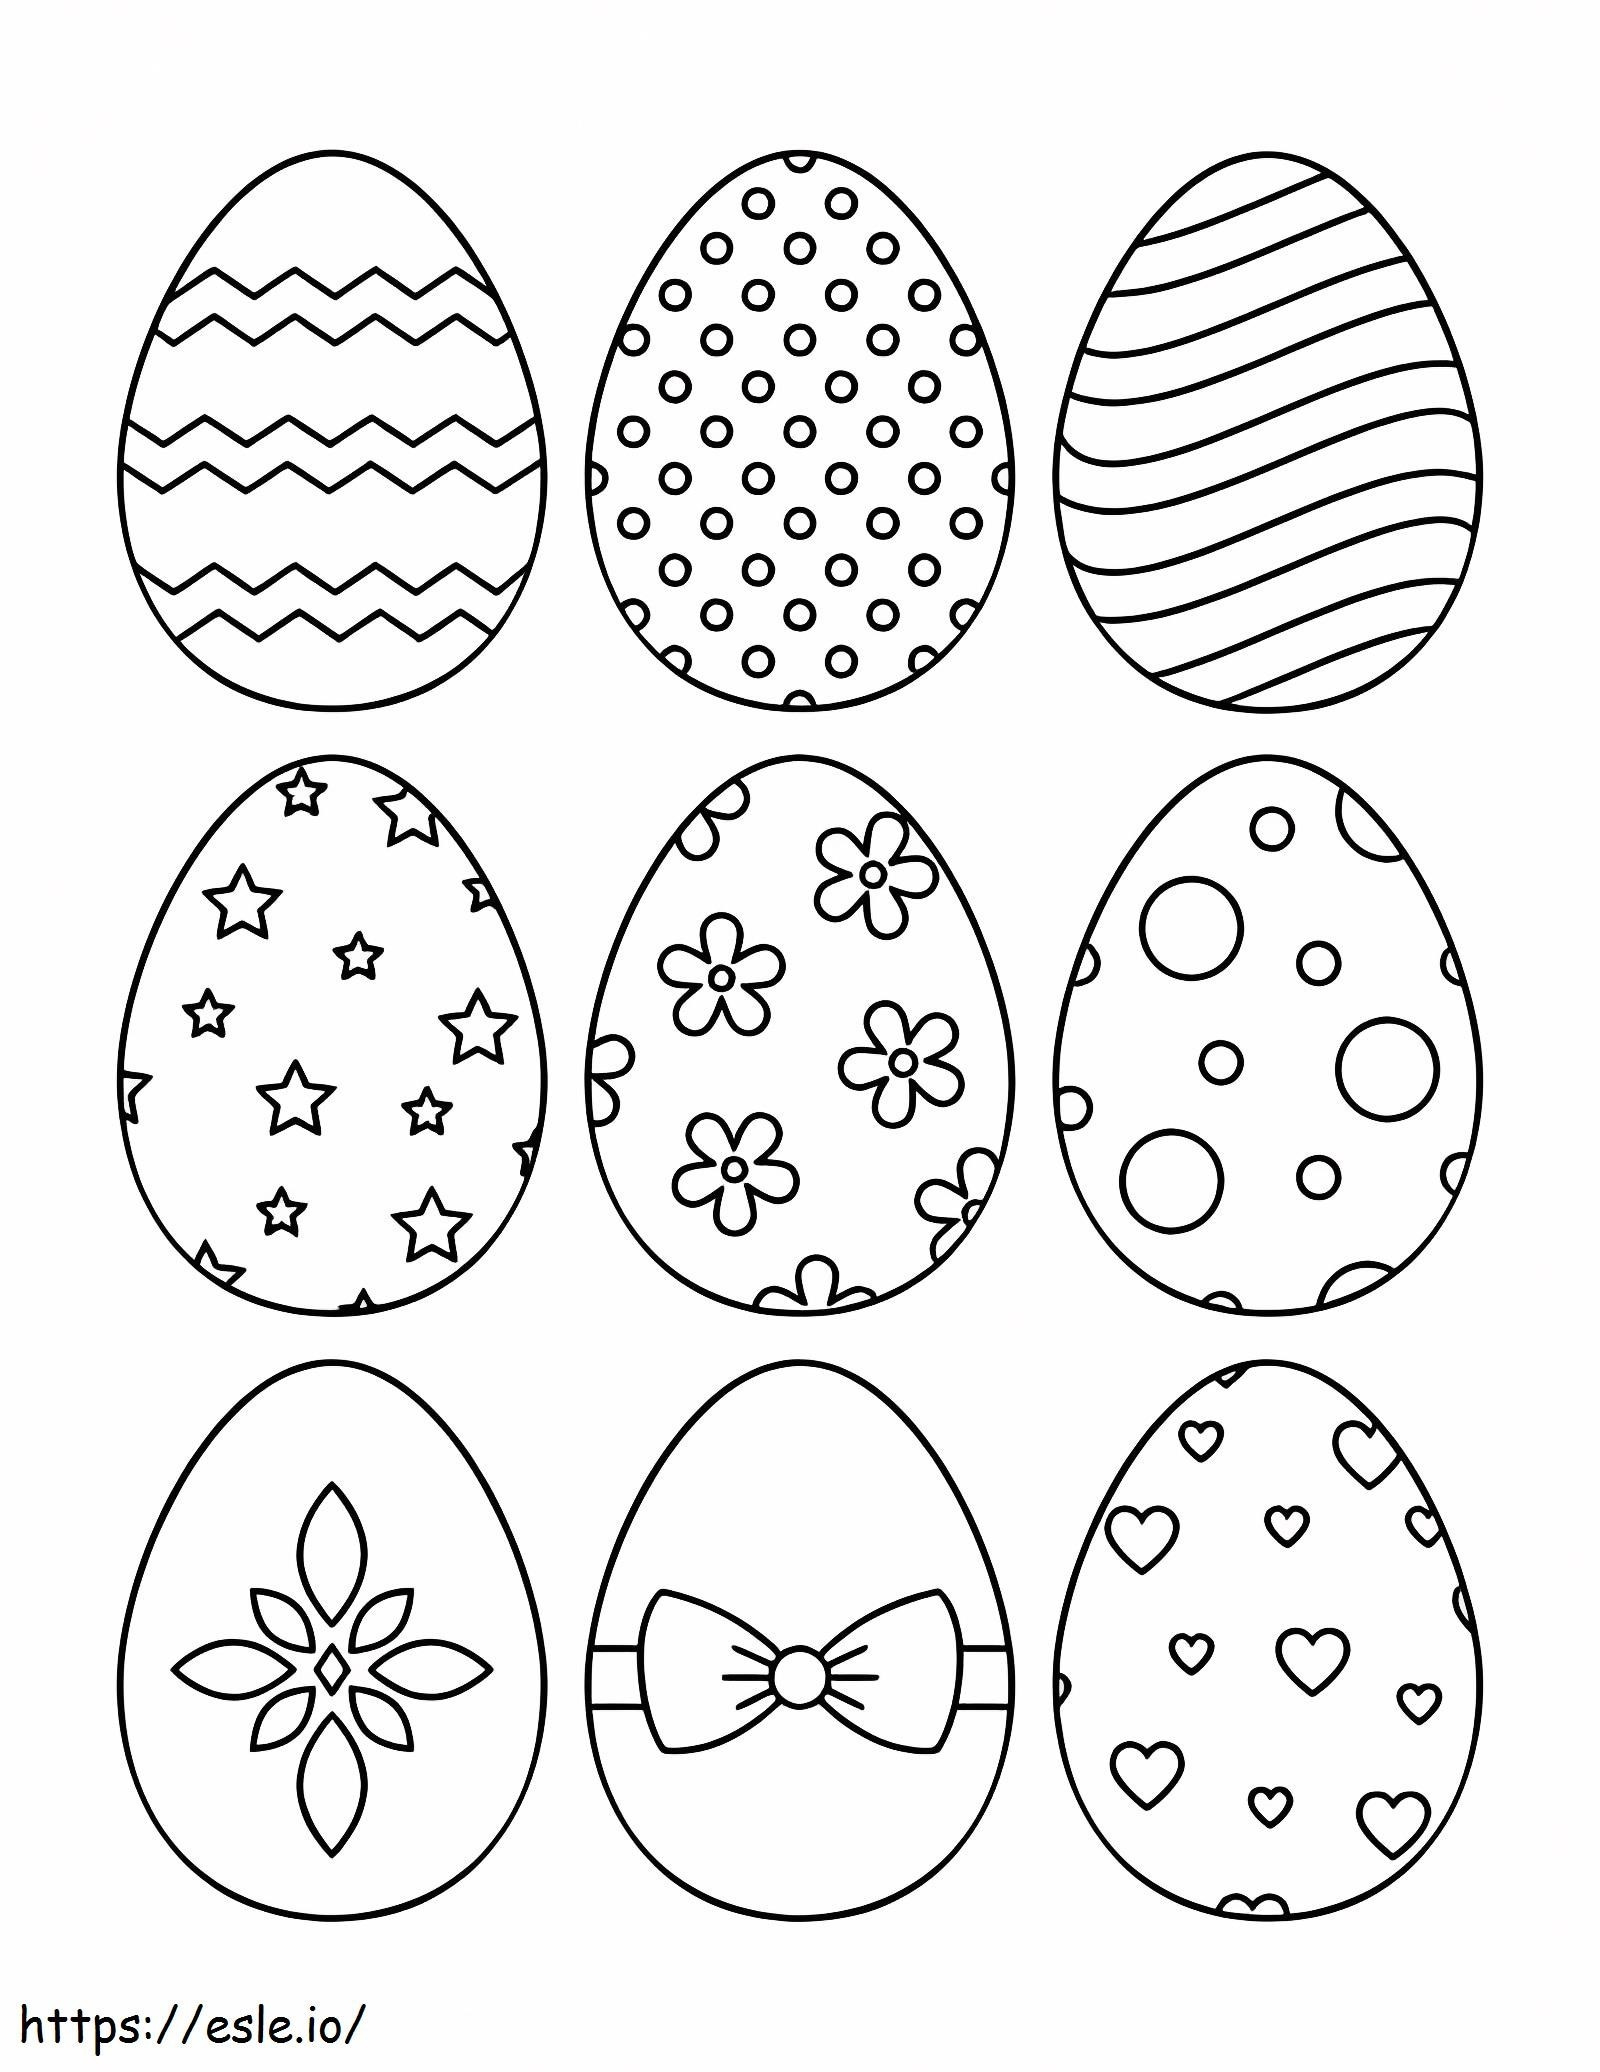 Nine Easter Eggs coloring page